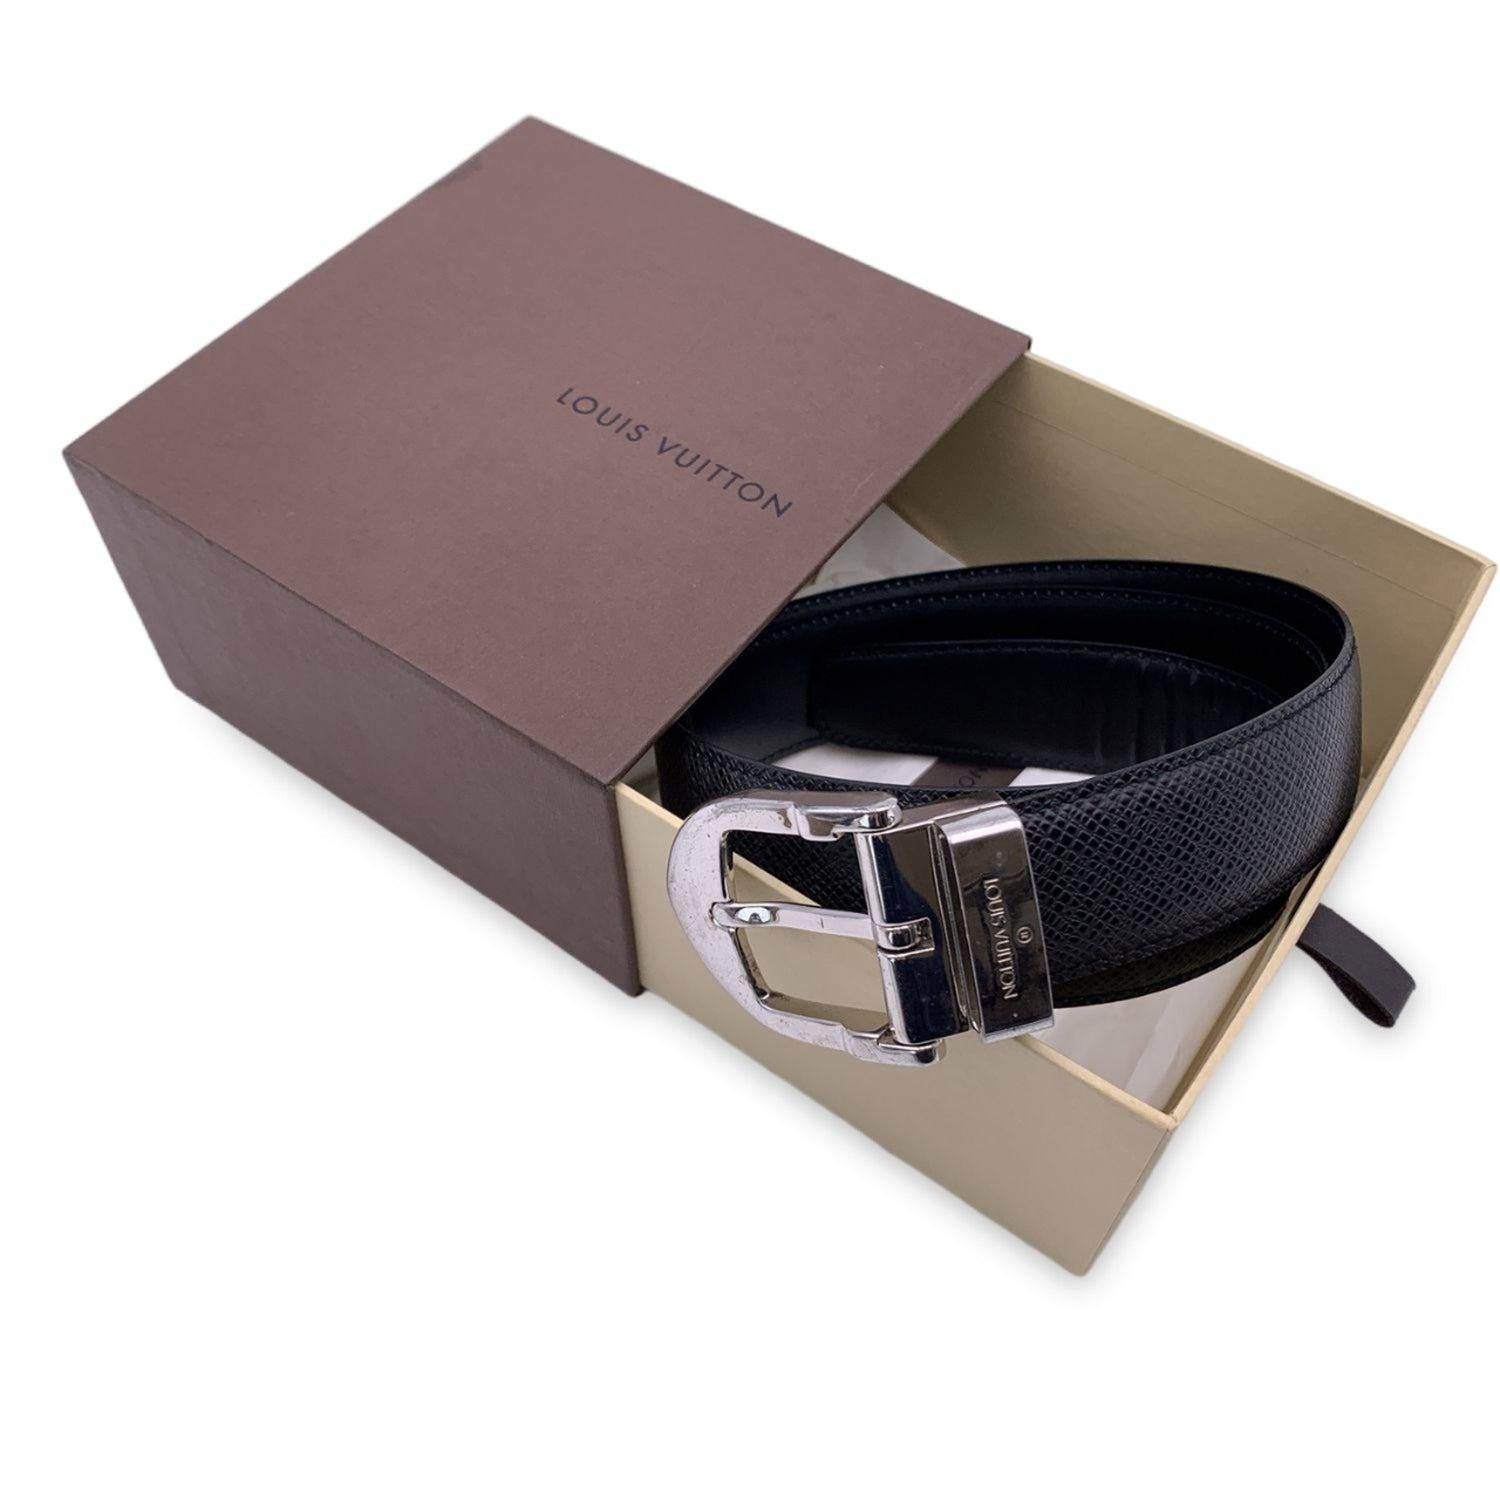 LOUIS VUITTON black taiga 'Ceinture Classic' leather belt. The belt features a silver metal buckle with engraved 'Louis Vuitton' signature. Five holes adjustment. Size 85/34. Width: 1.1 inches - 3 cm. Total length: 38 inches - 96.5 cm (only